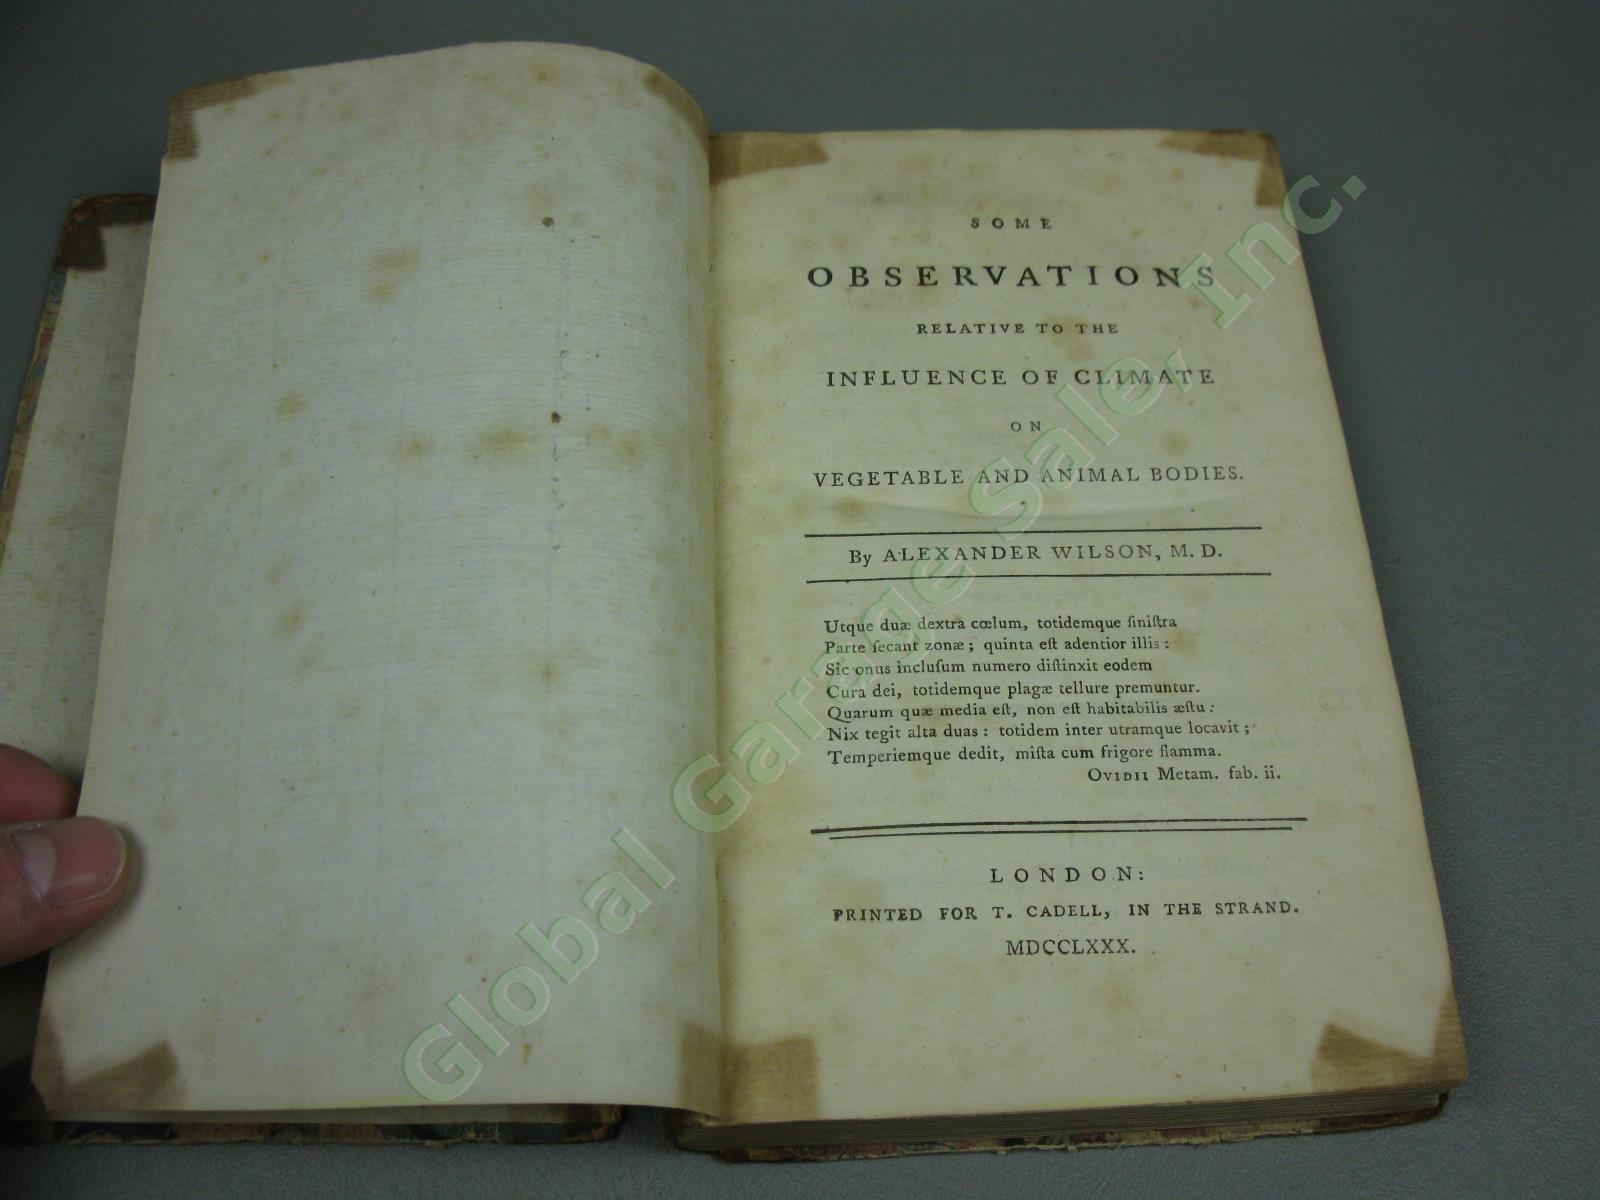 1780 Some Observations Relative To The Influence Climate Book Alexander Wilson 4